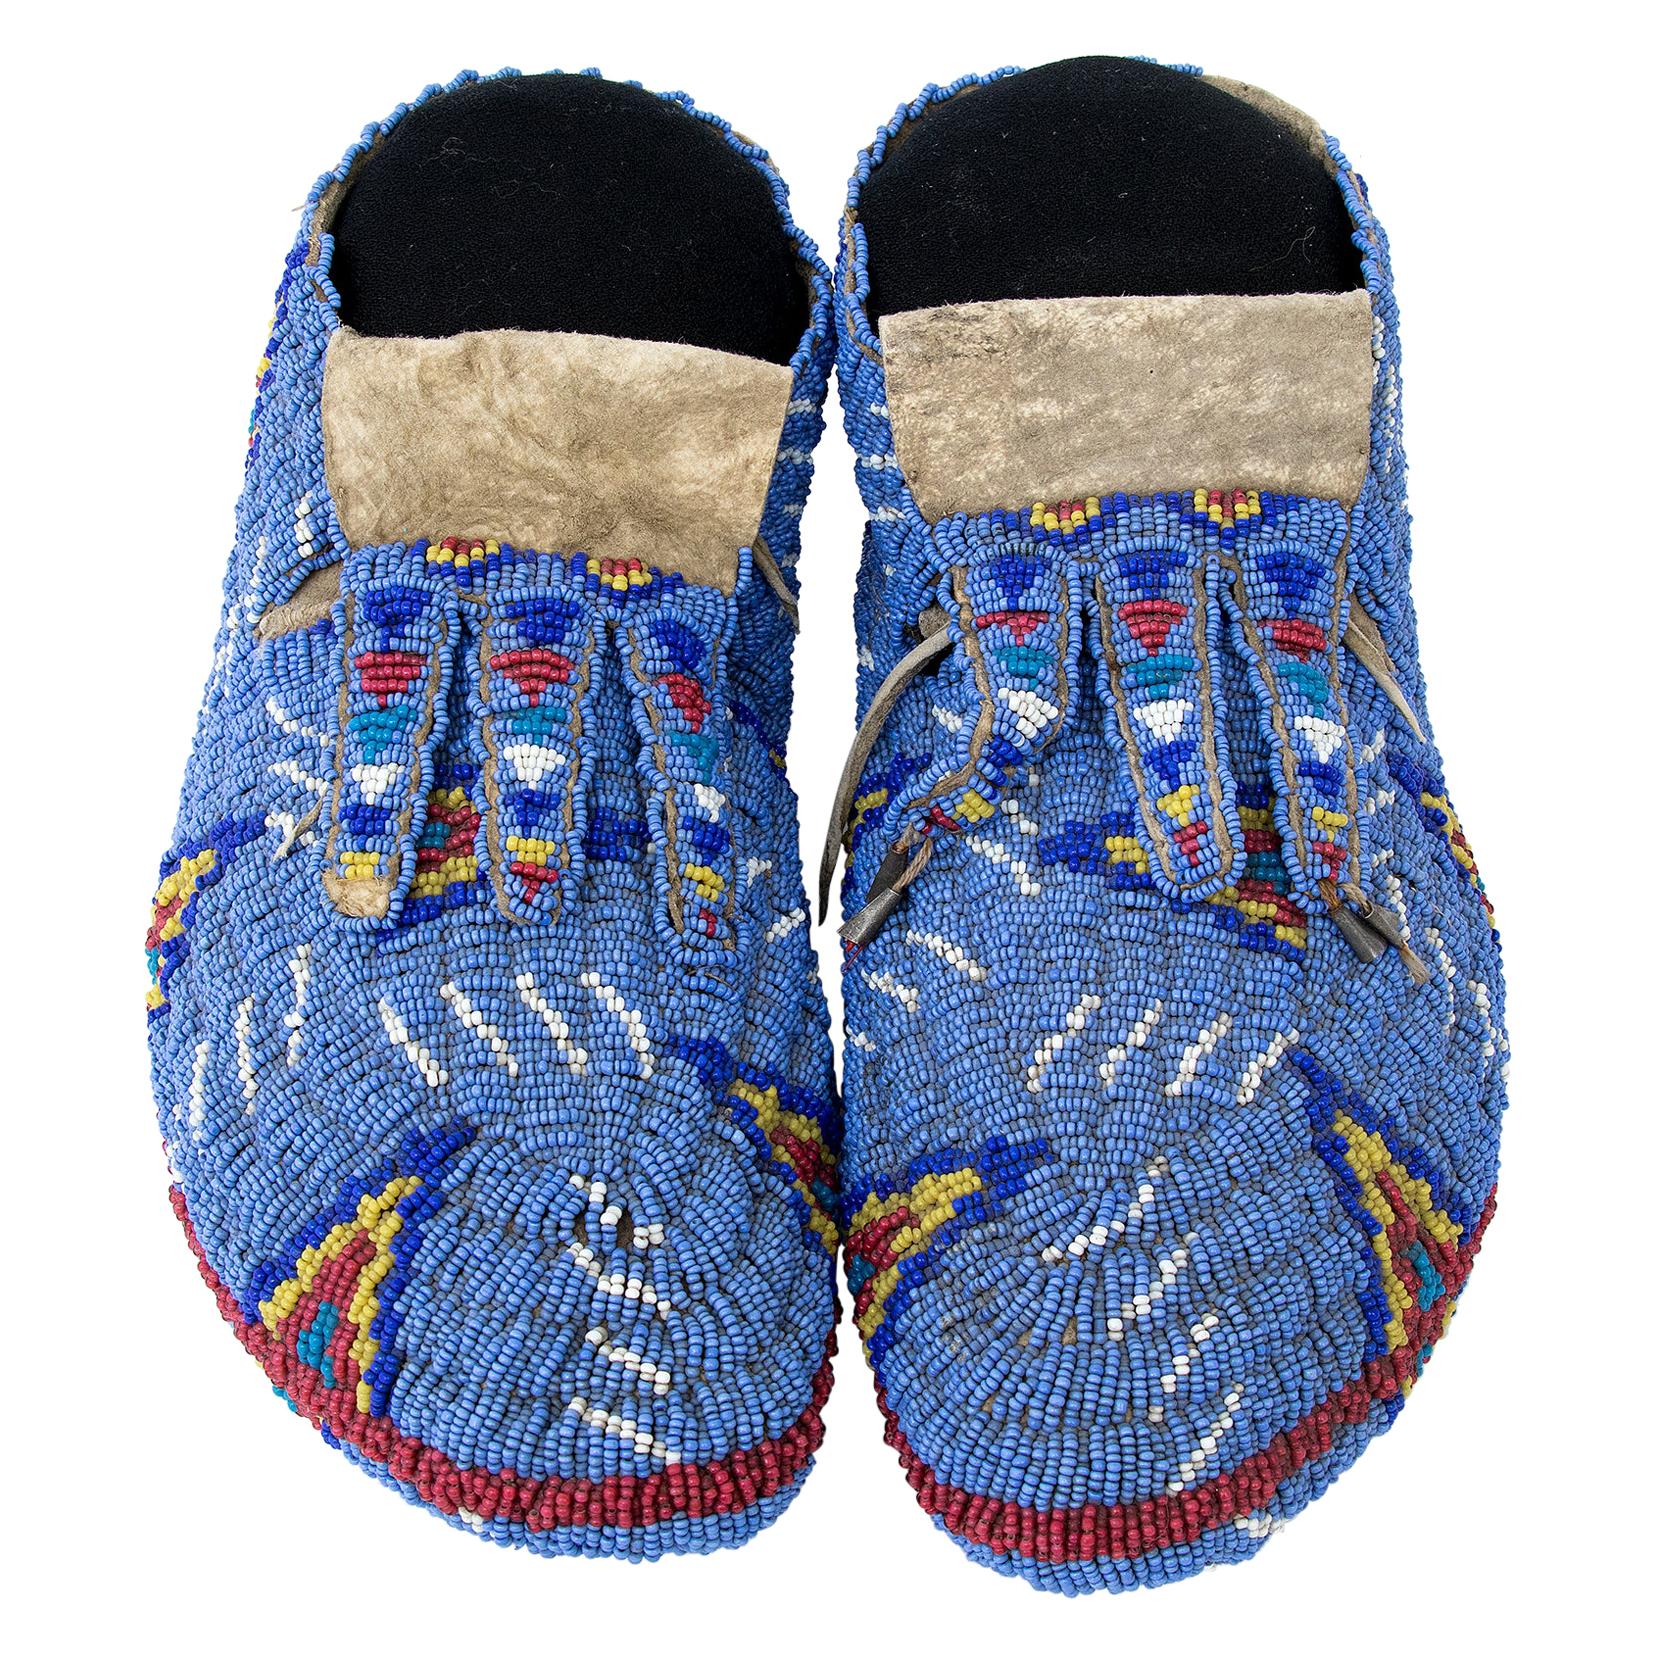 Moccasins, Early 20th Century, Sioux, Plains Indian, Pictorial Bead Work, Tepees